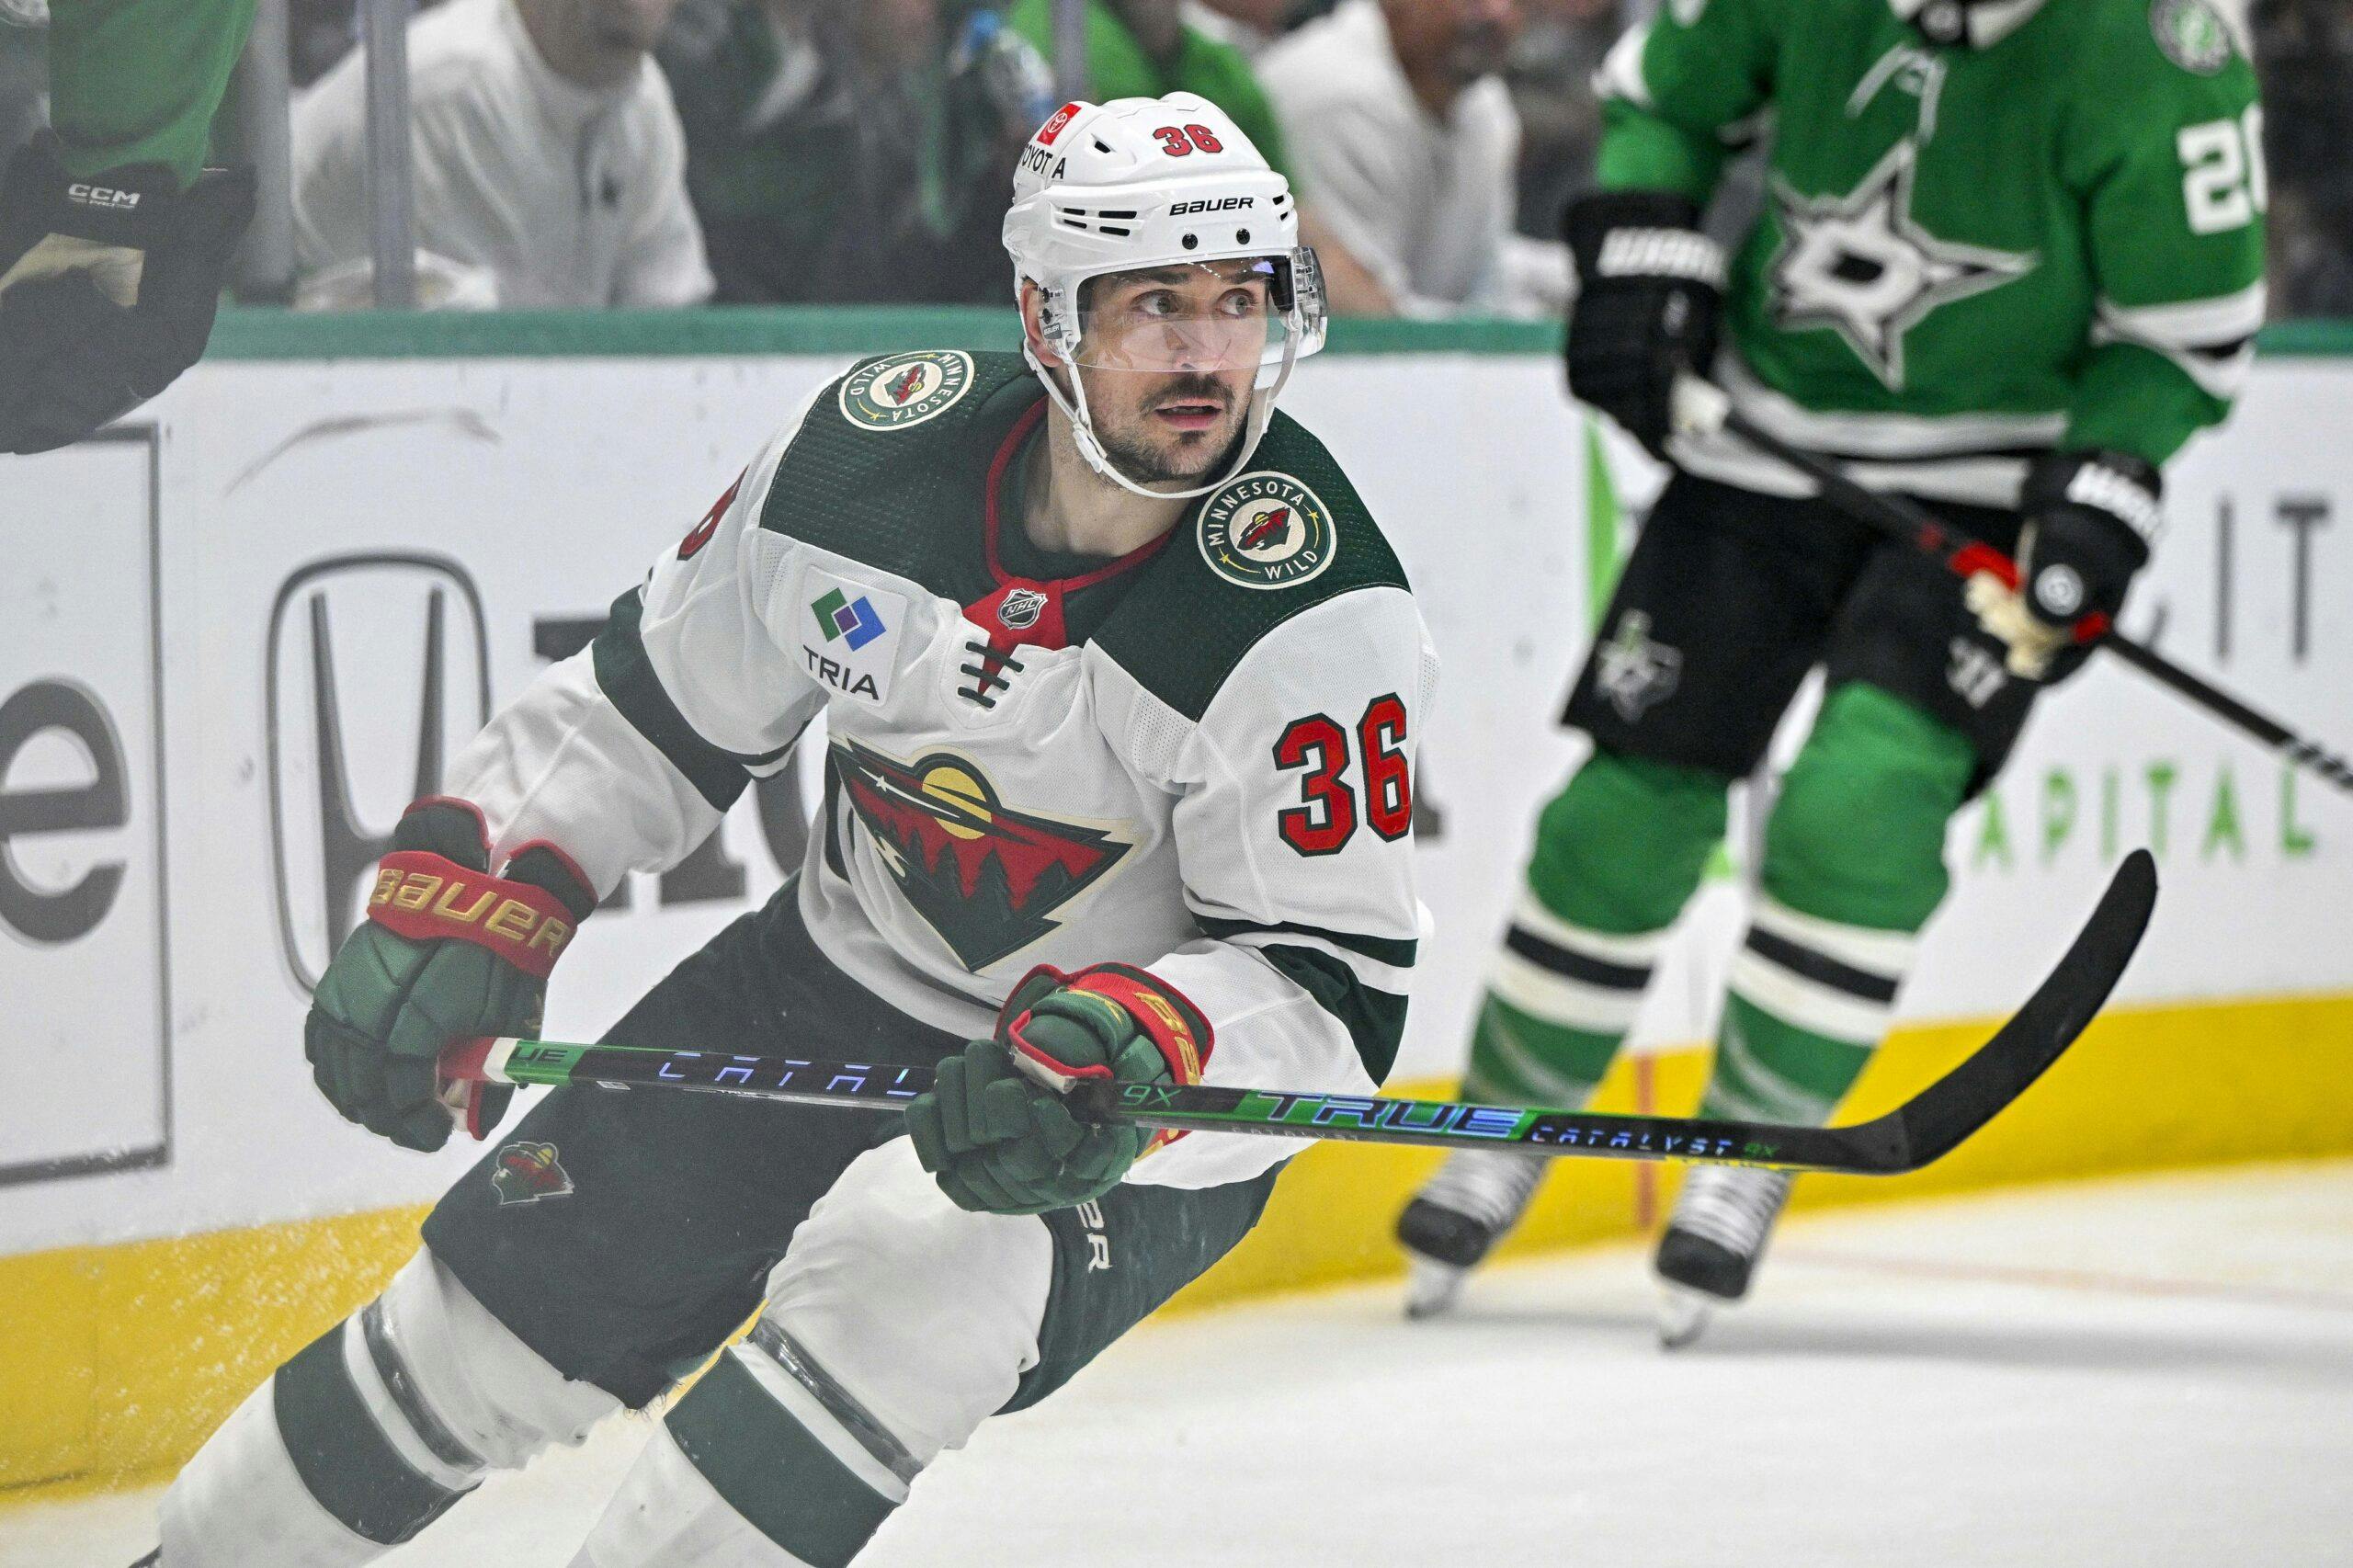 Minnesota Wild sign Mats Zuccarello to two-year extension with $4.125 million AAV